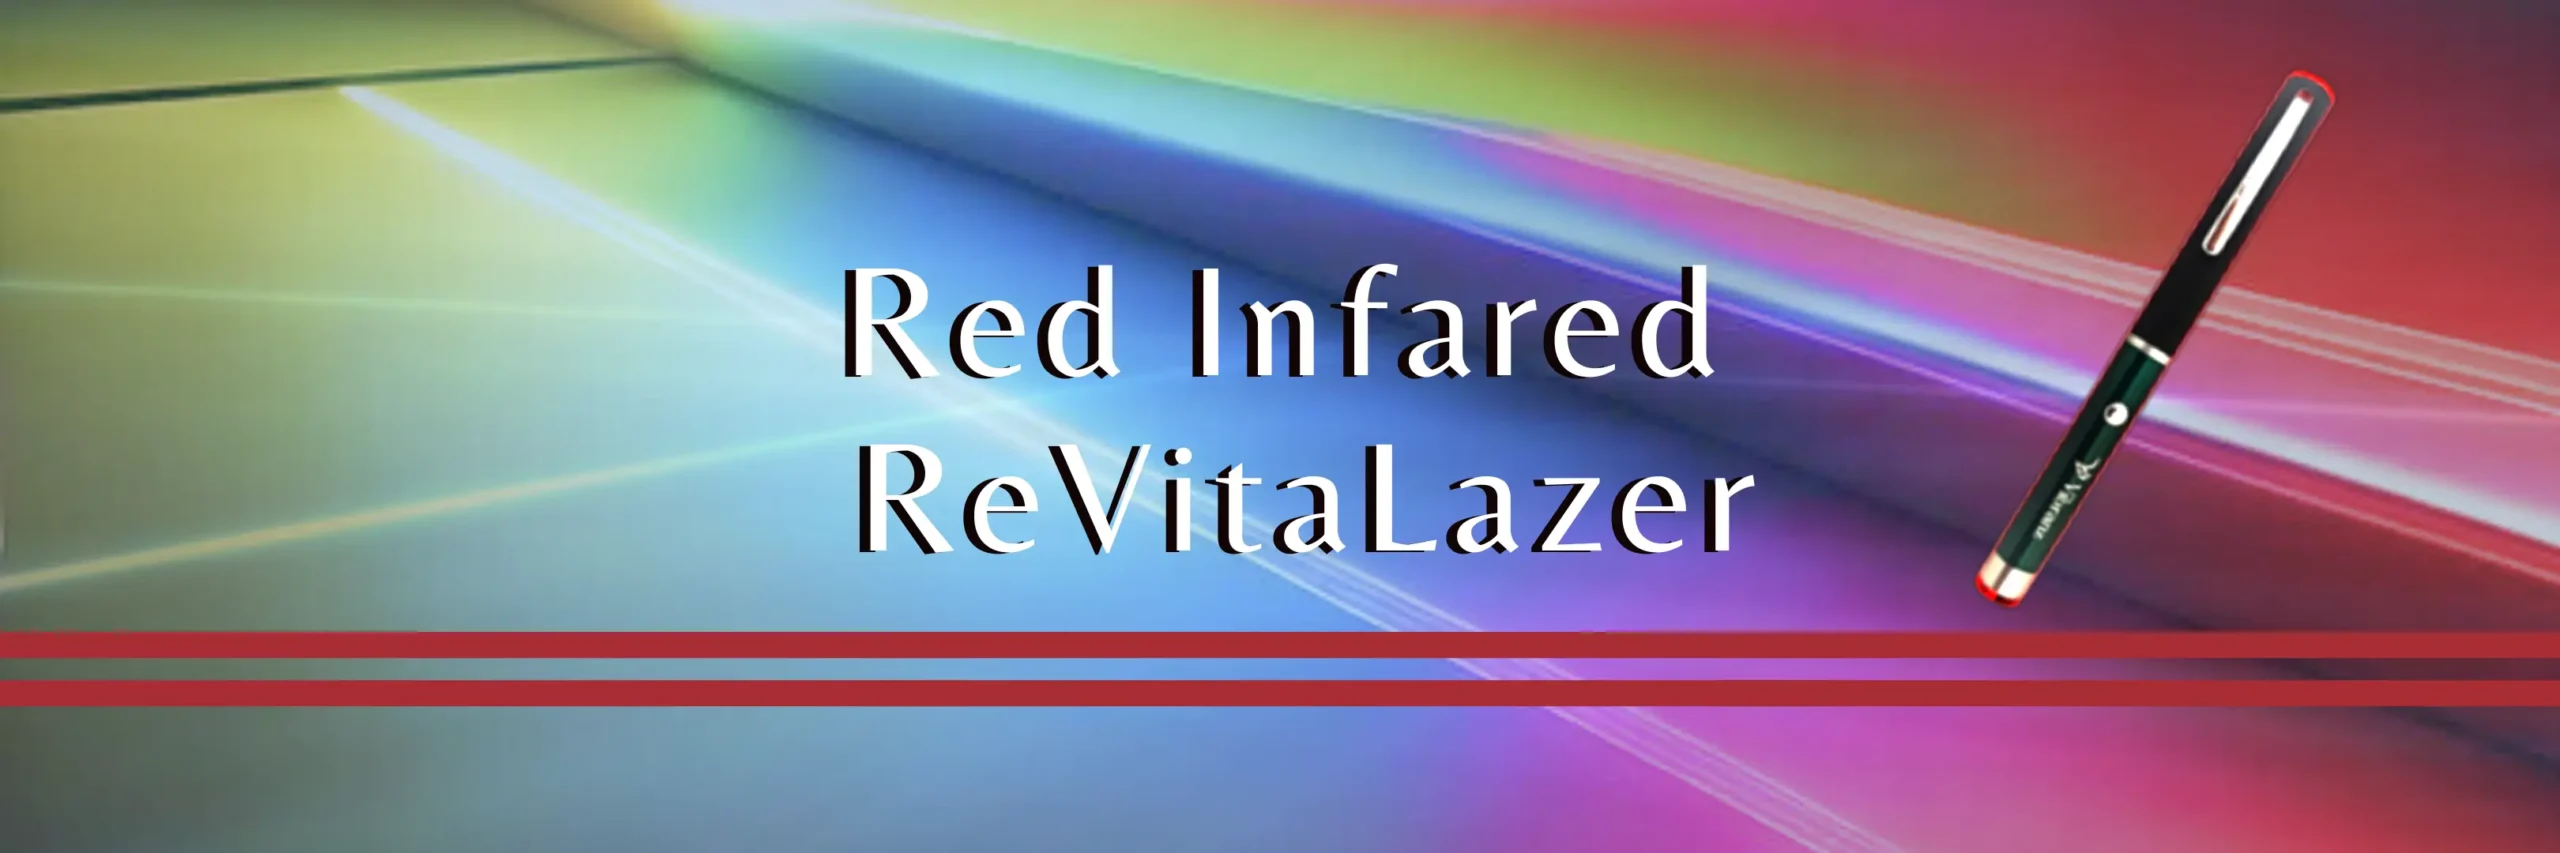 red infrared revitalazer also known as red laser